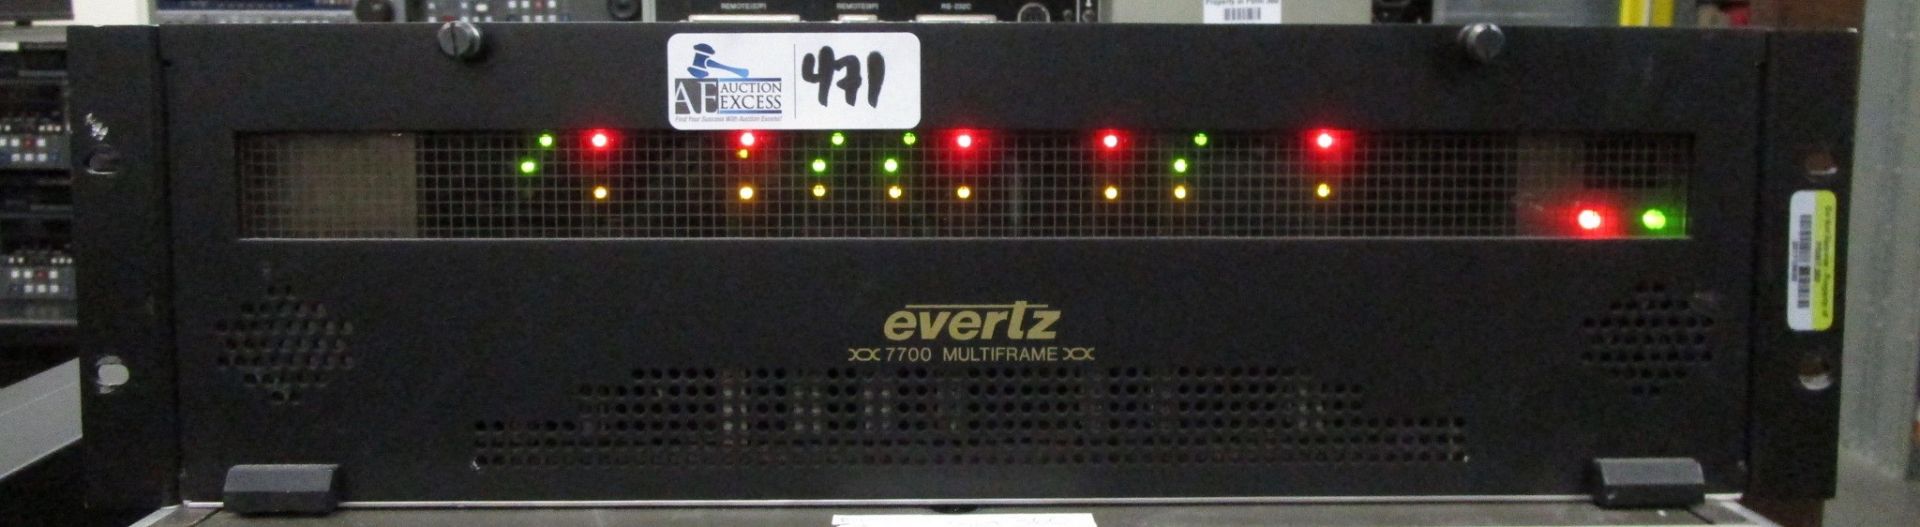 EVERTZ 7700 MULTIFRAME WITH POWER SUPPLY AND CARDS